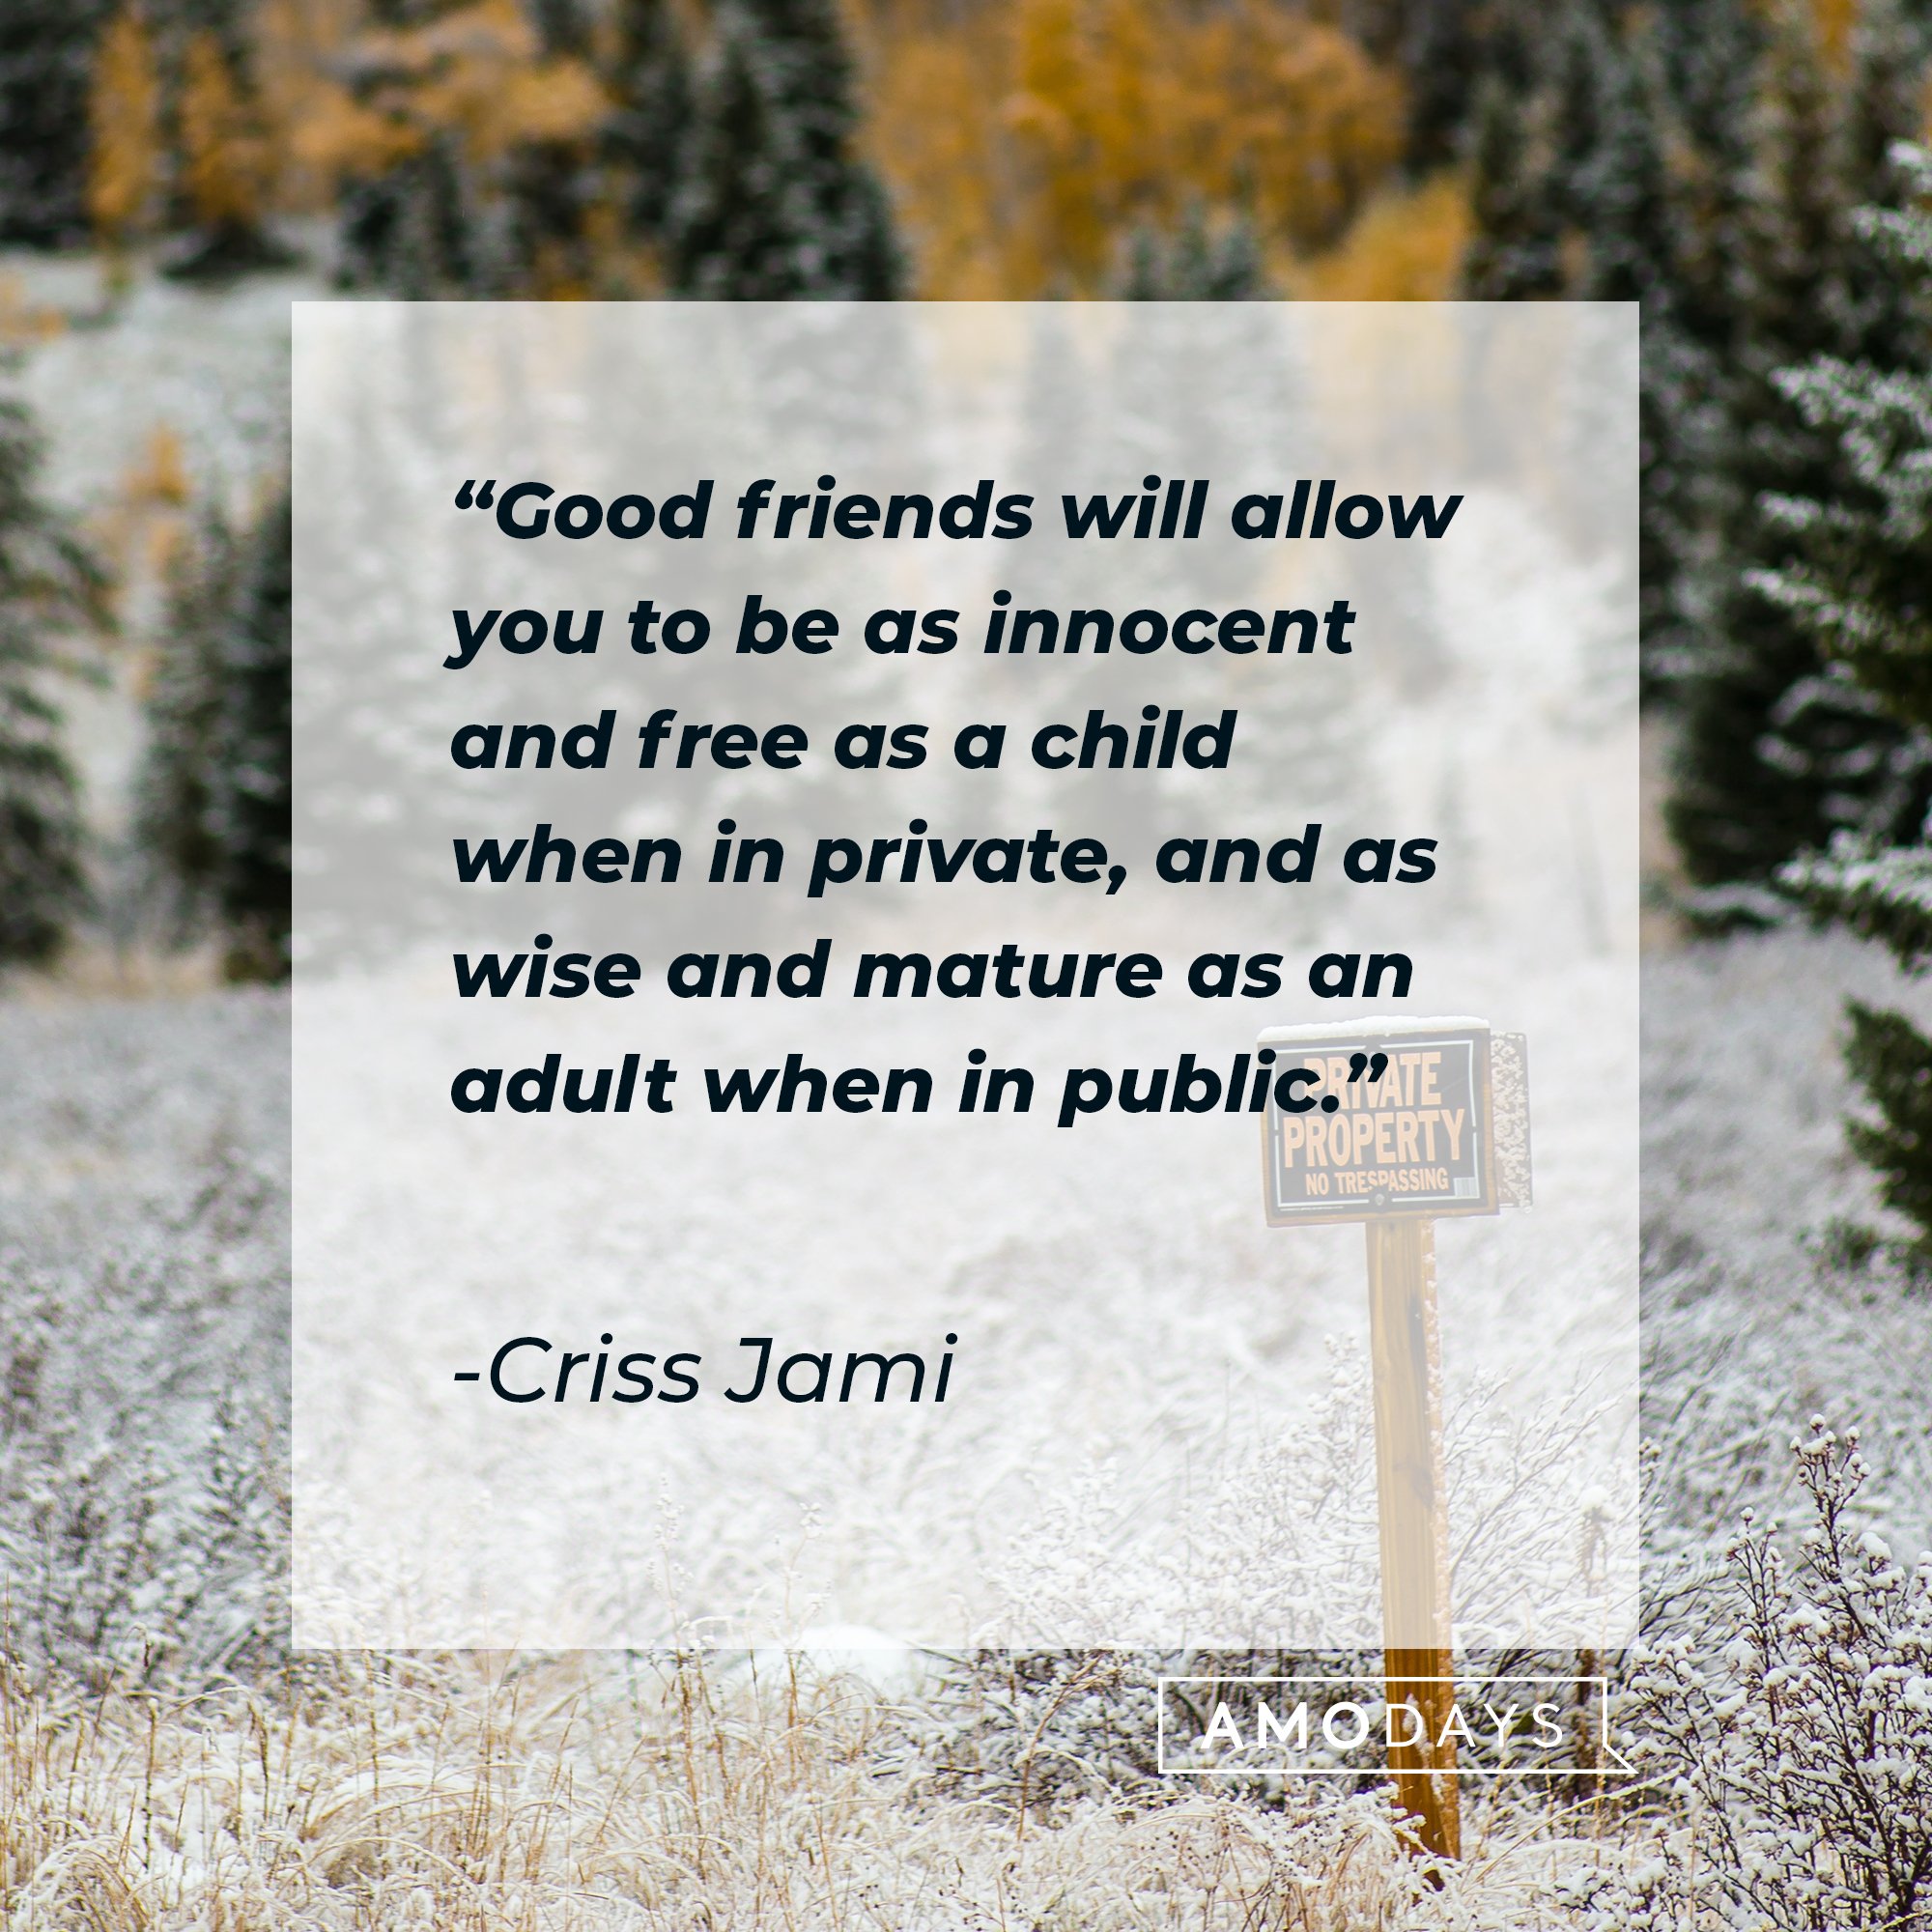 Criss Jami’s quote: "Good friends will allow you to be as innocent and free as a child when in private, and as wise and mature as an adult when in public."  | Image: AmoDays 